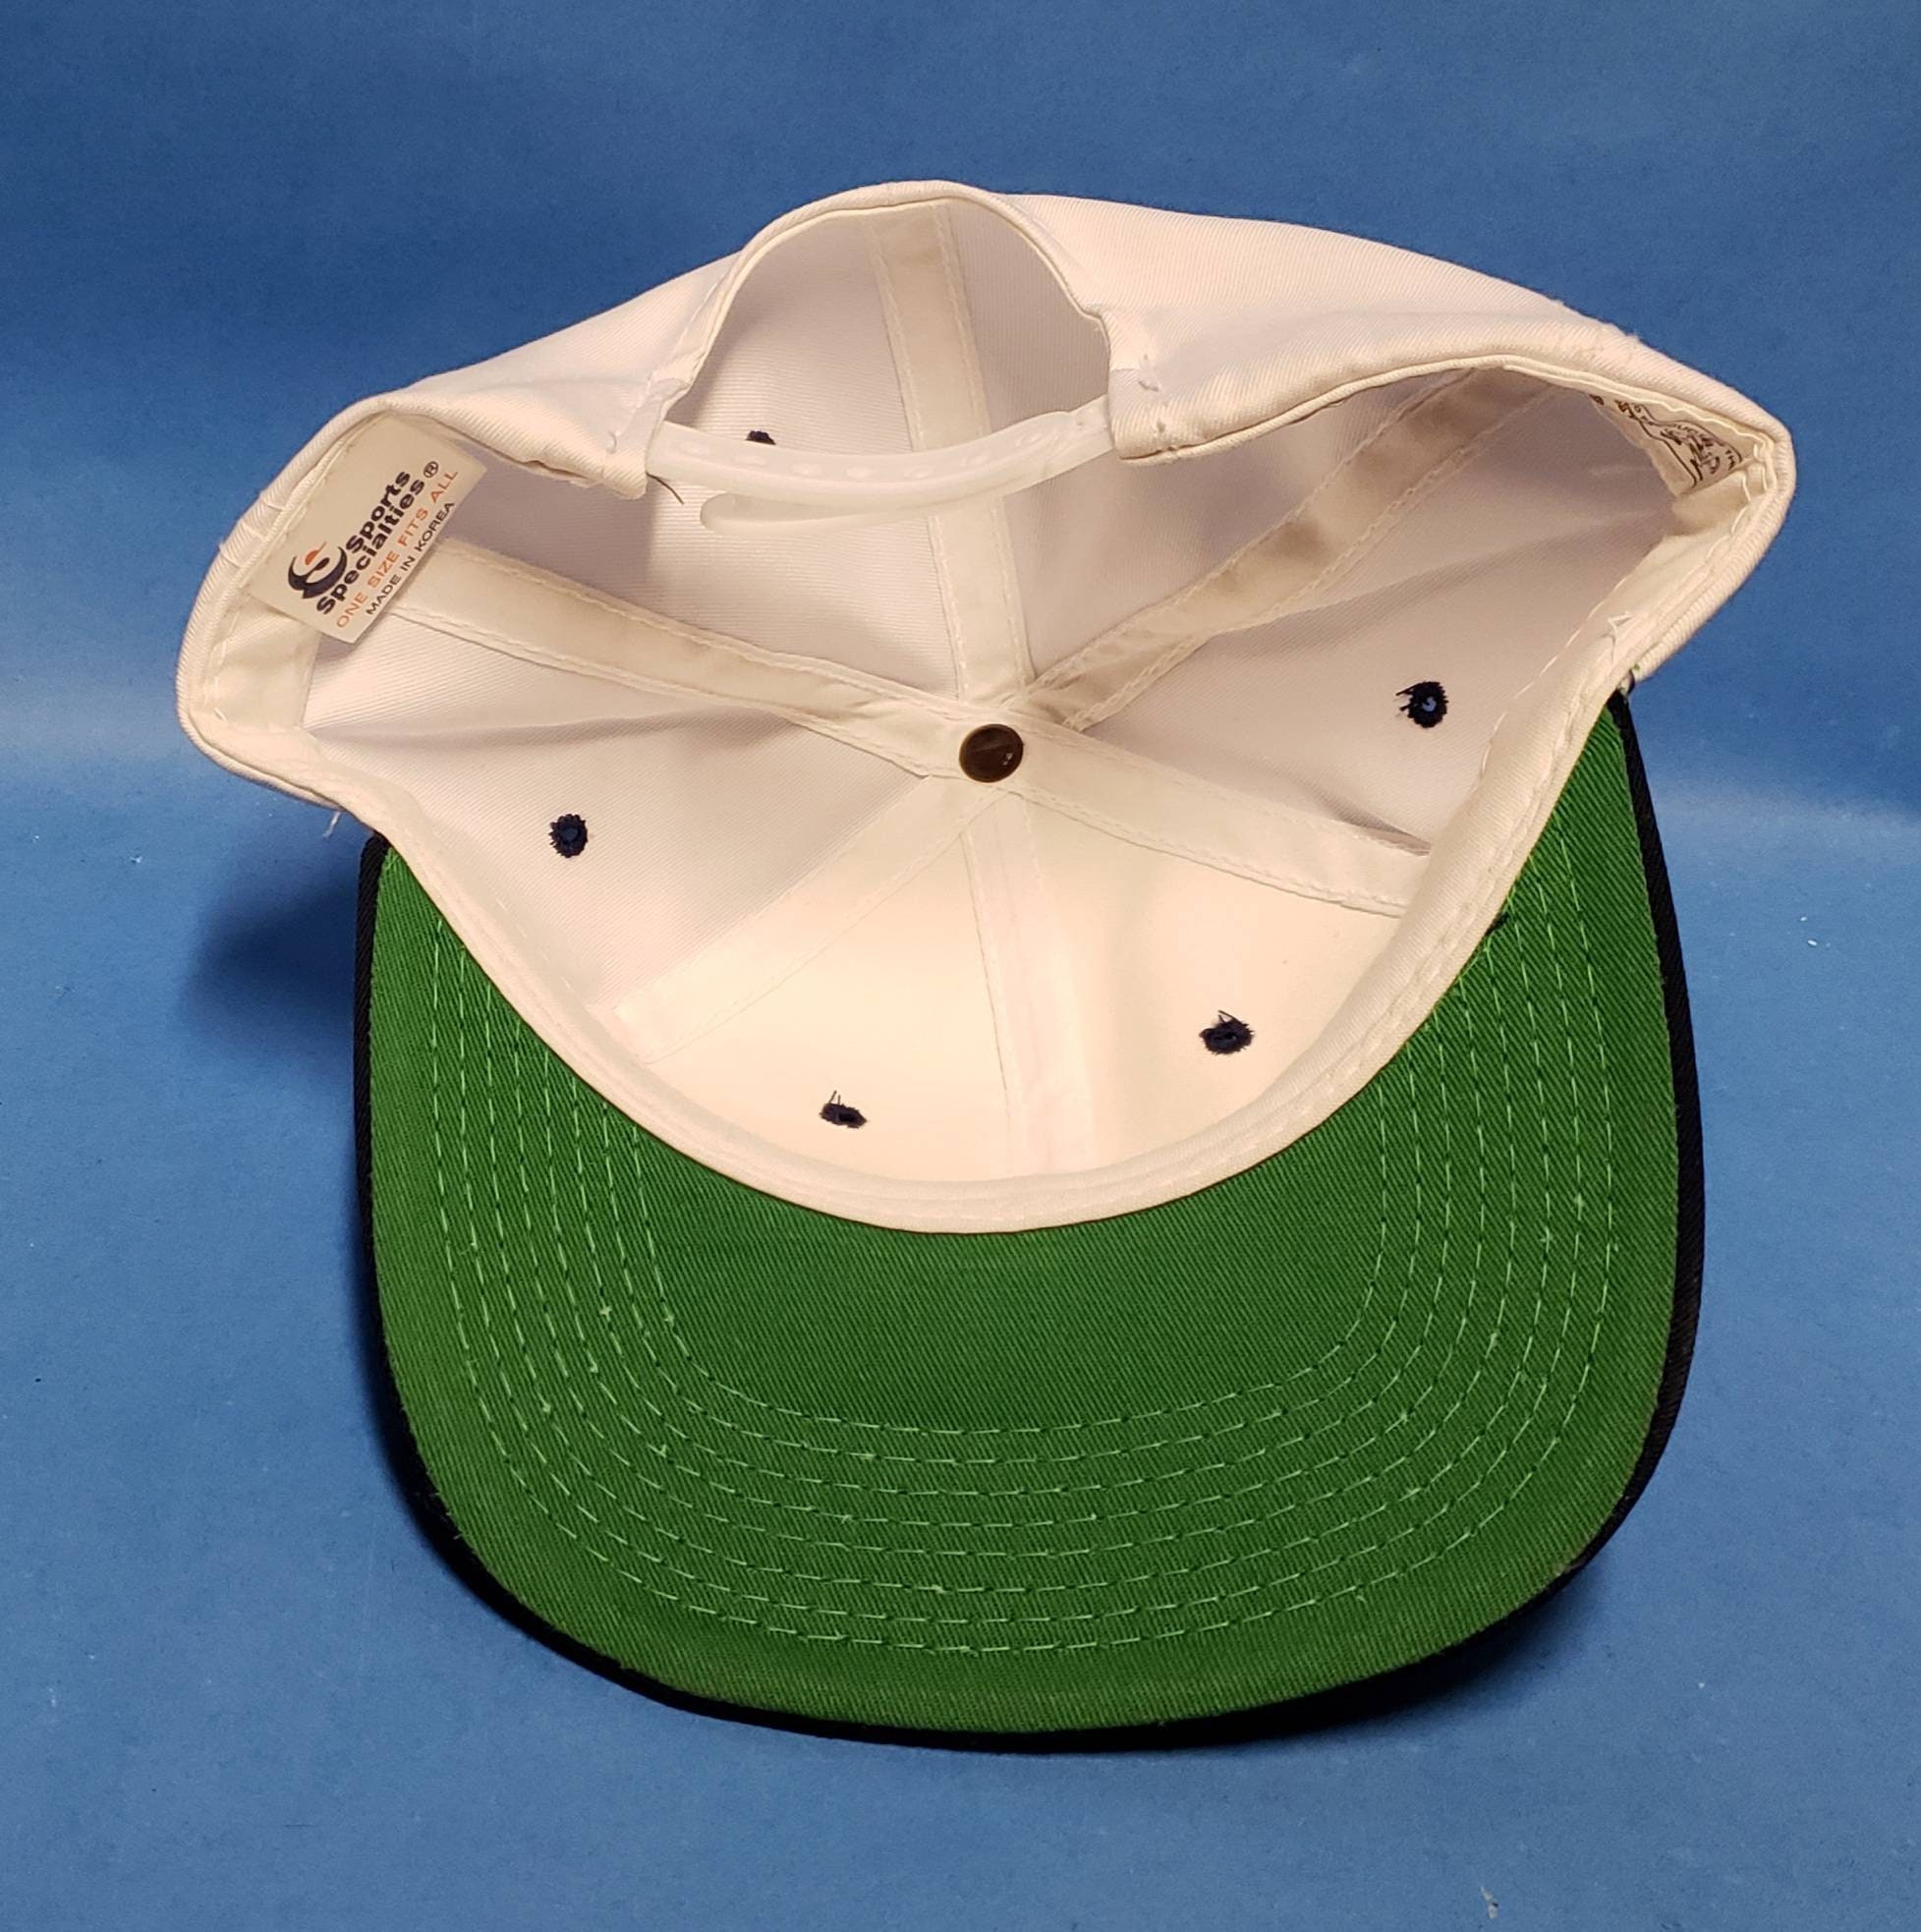 Vintage Boston Celtics Fitted Hat Sports Specialties Made USA 